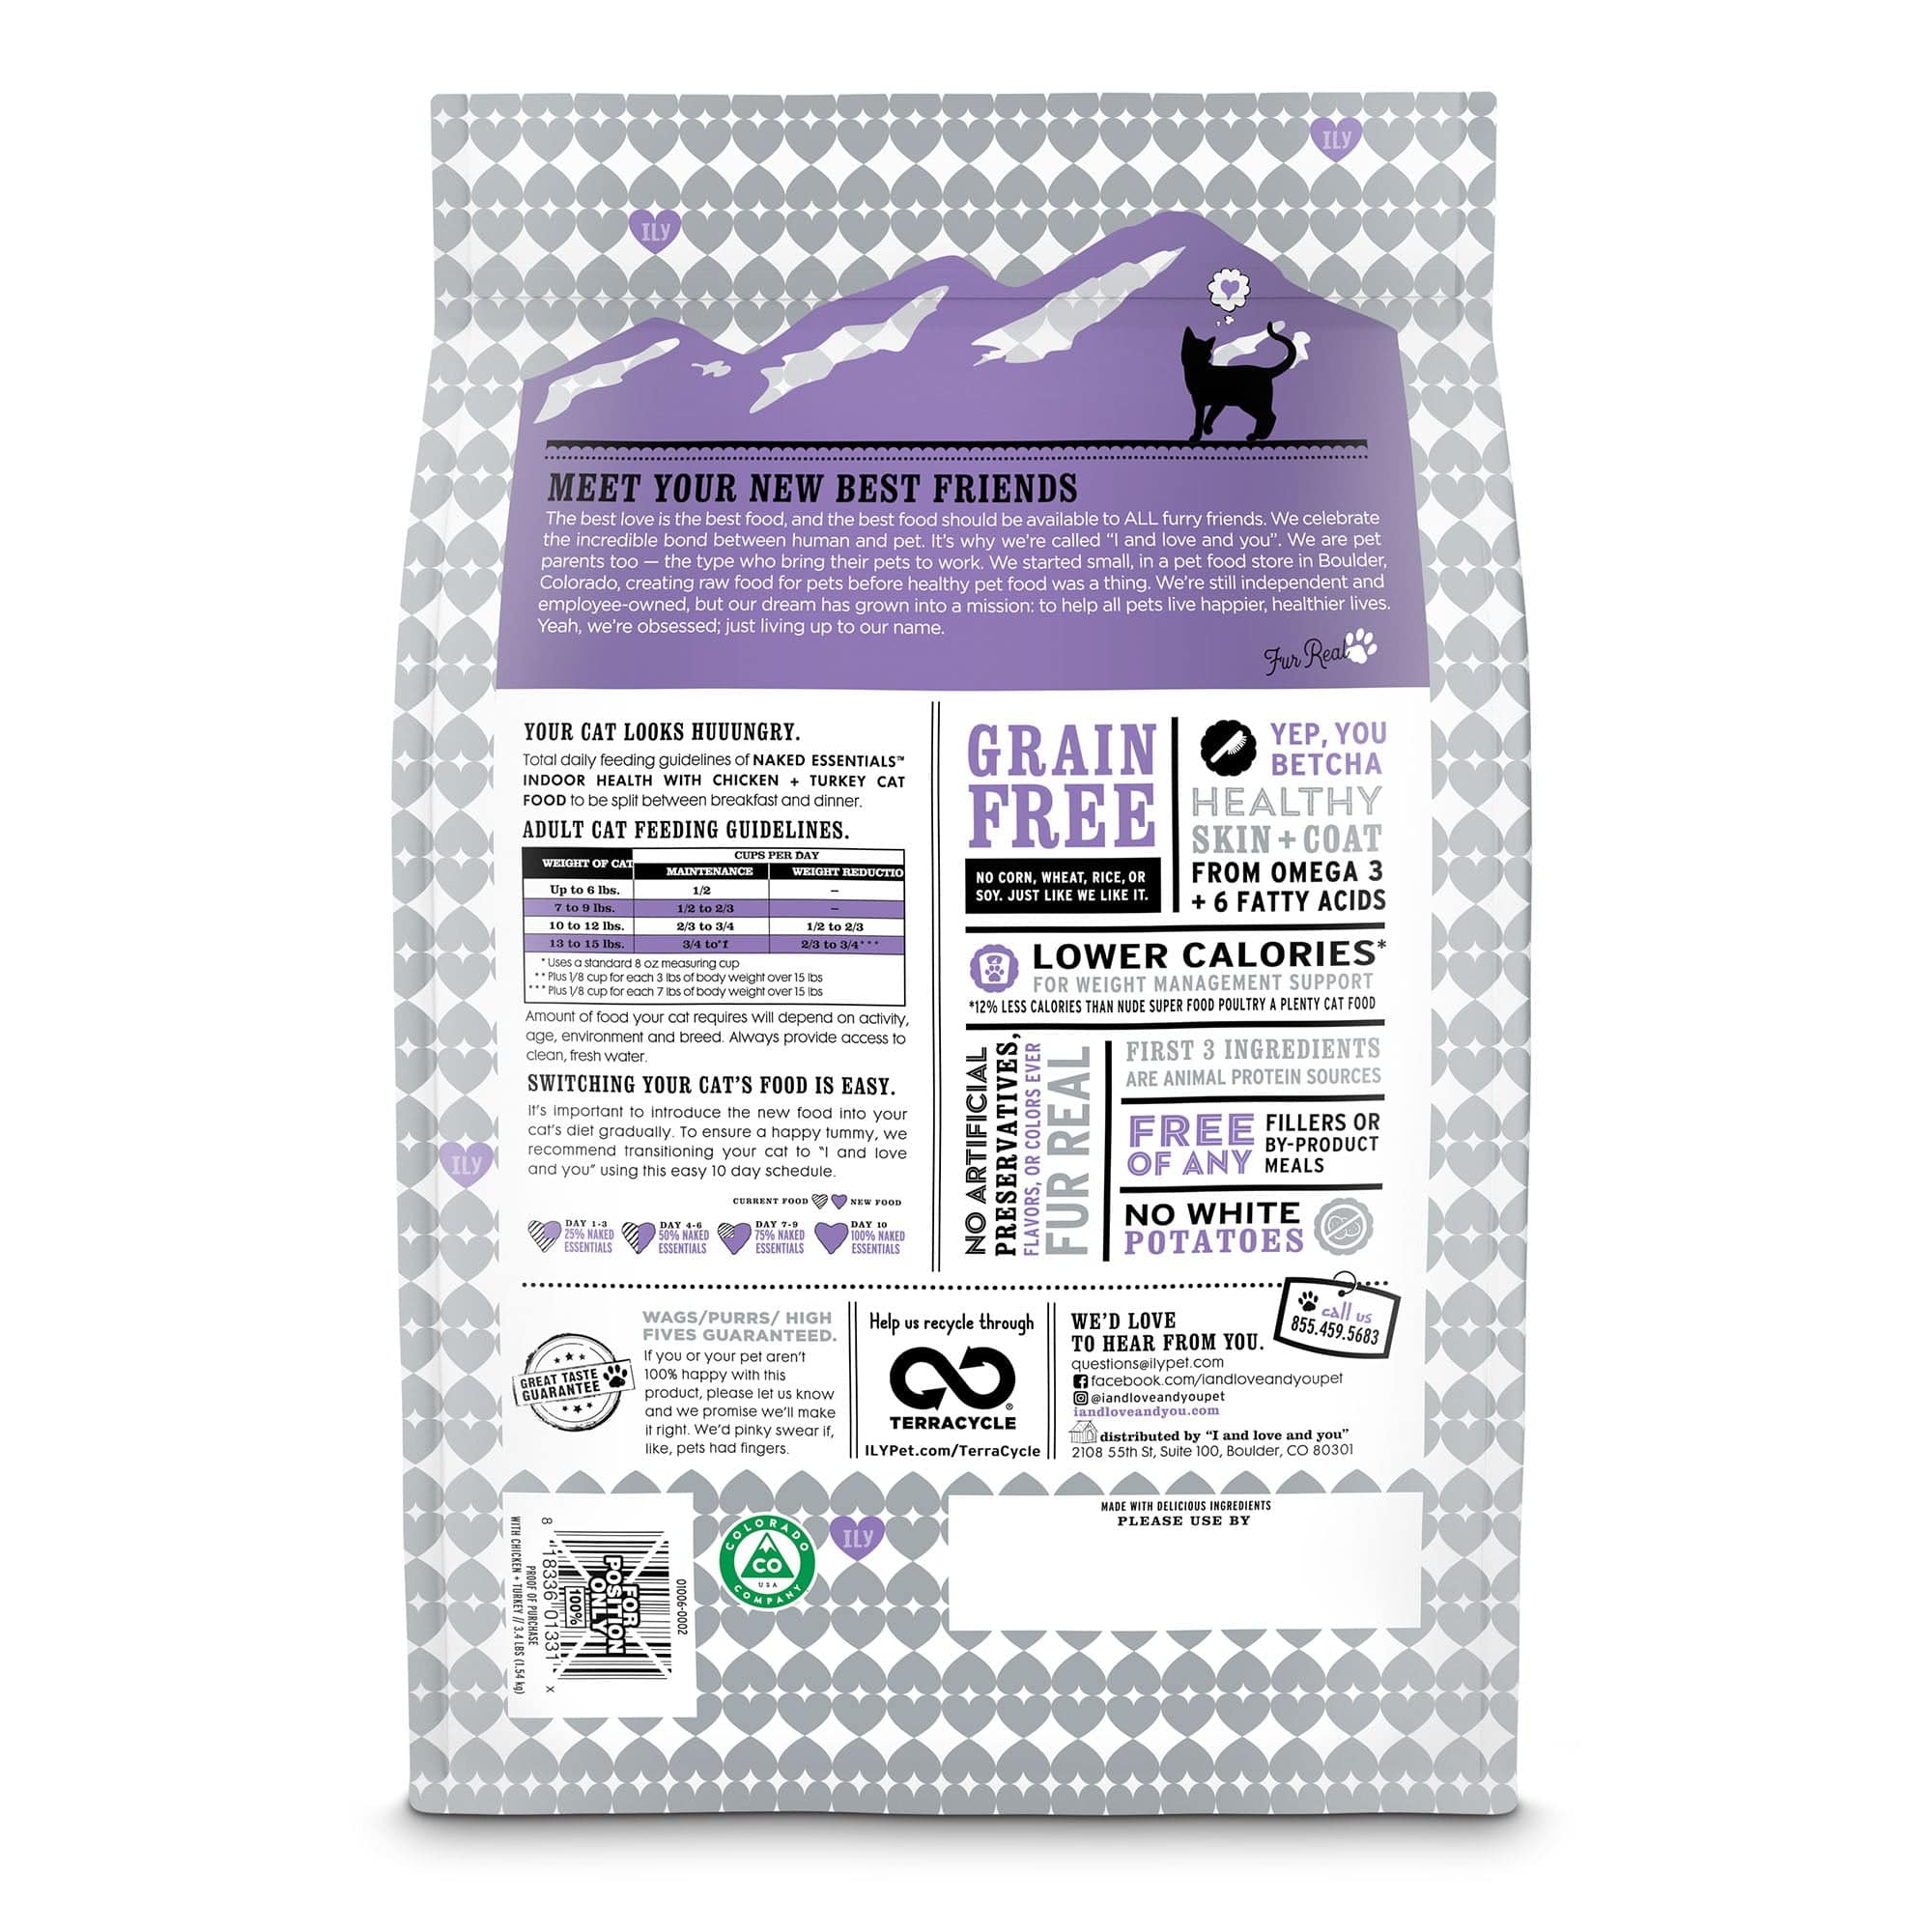 A bag of Naked Essentials Indoor Health kibble with chicken and turkey, package back side with list of ingredients, instructions and barcode